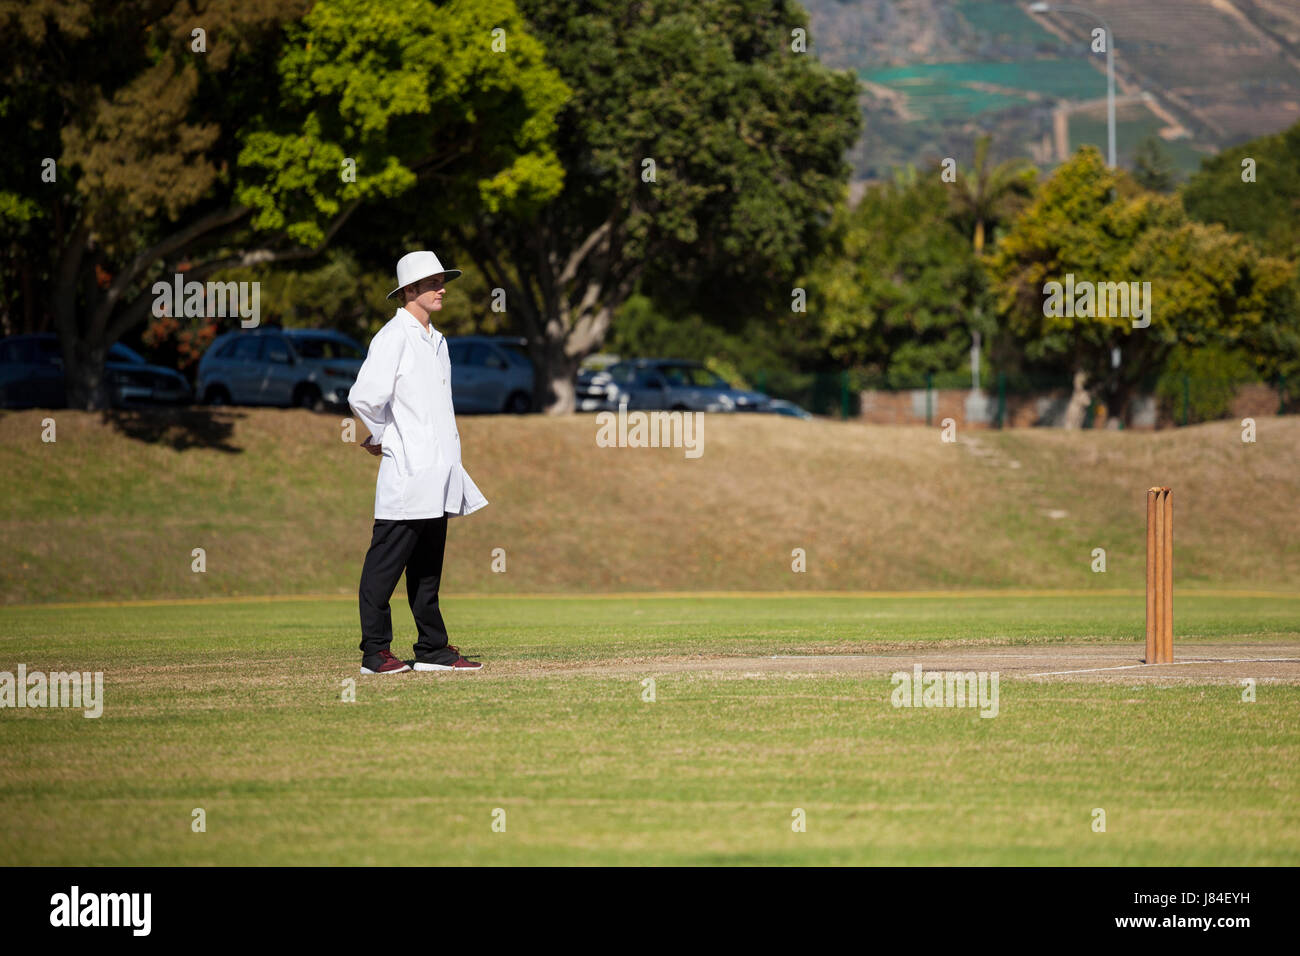 Full length of umpire standing on cricket field during sunny day Stock Photo